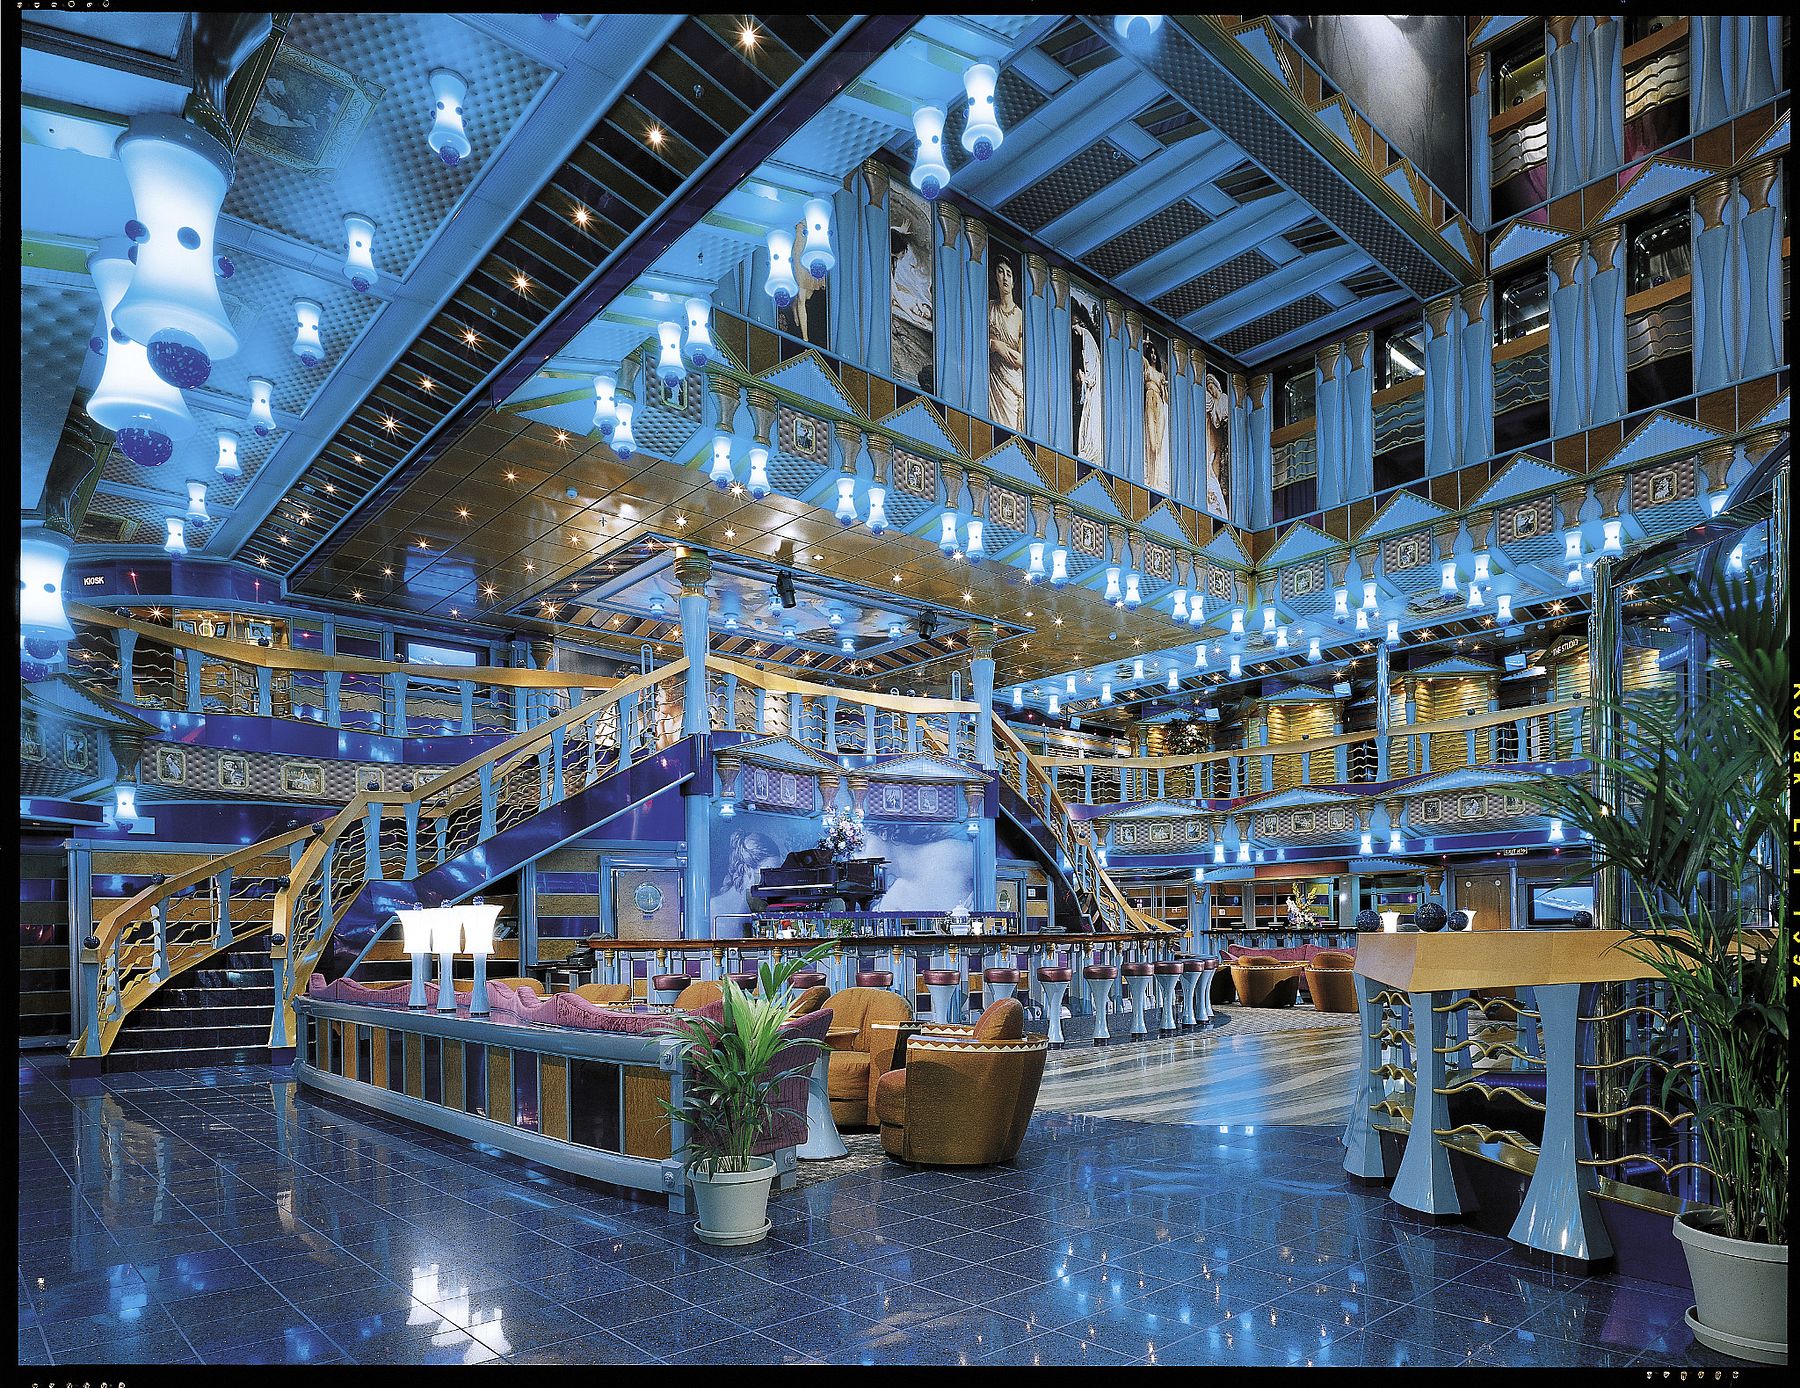 Atrium Bar on the Carnival Miracle